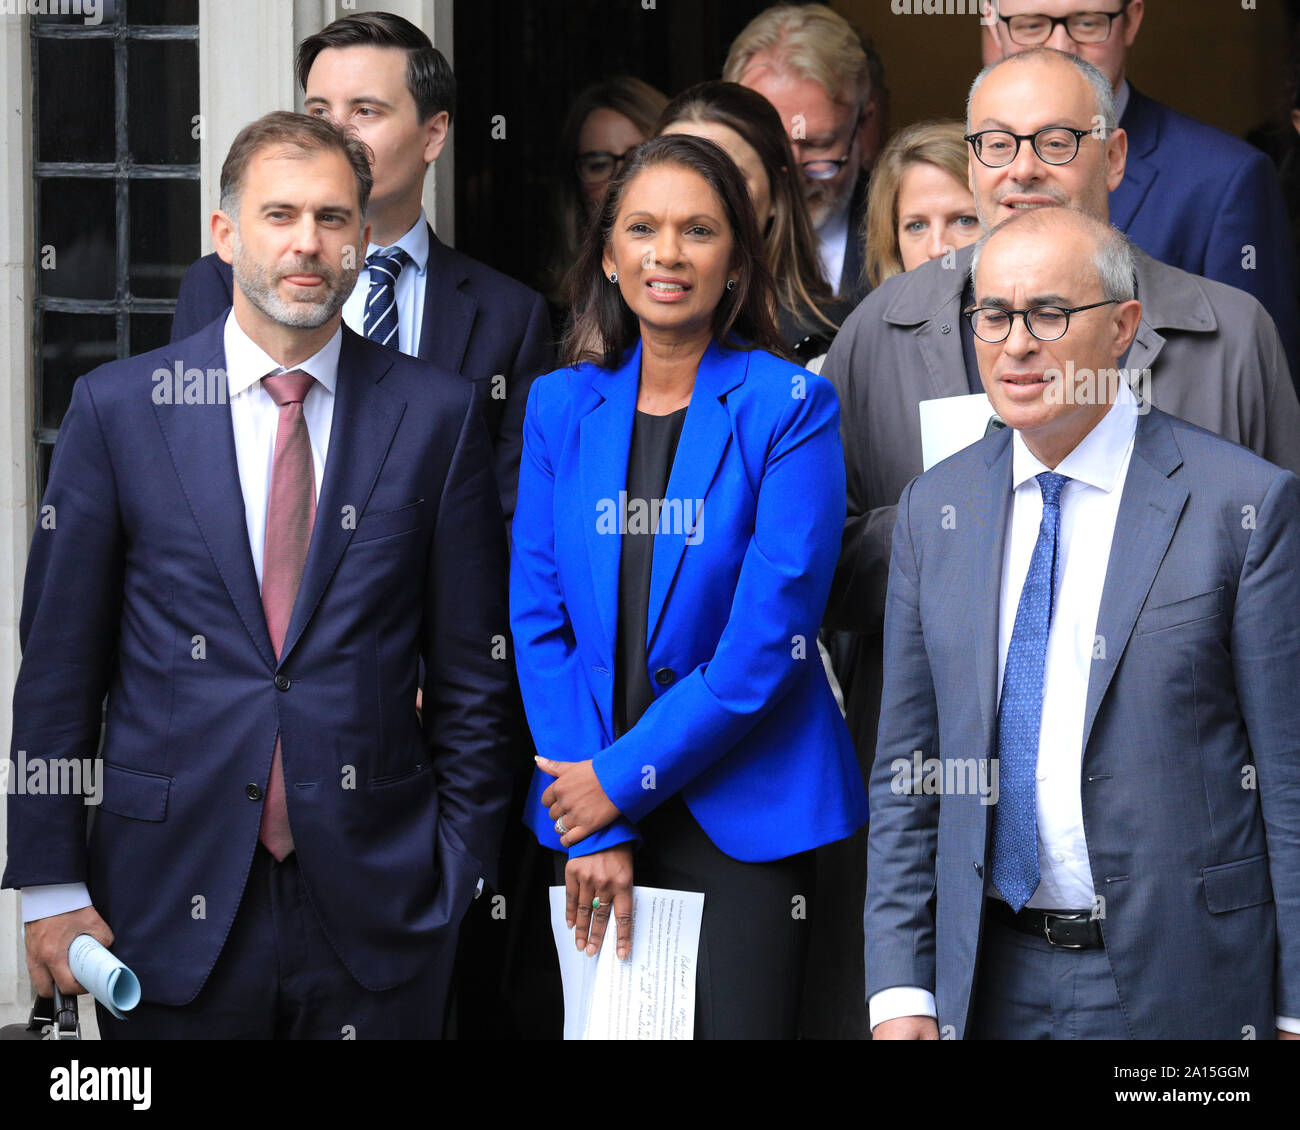 Westminster, London, UK. 24th Sep, 2019. Gina Miller speaks after winning the case, with Lord Pannick on her right side. The Supreme Court case ruling on the suspension of Parliament by the Prime Minister is announced at the court in Westminster this morning - the ruling outcome was against the government, judges found unanimously that that prorogation was illegal. Credit: Imageplotter/Alamy Live News Stock Photo